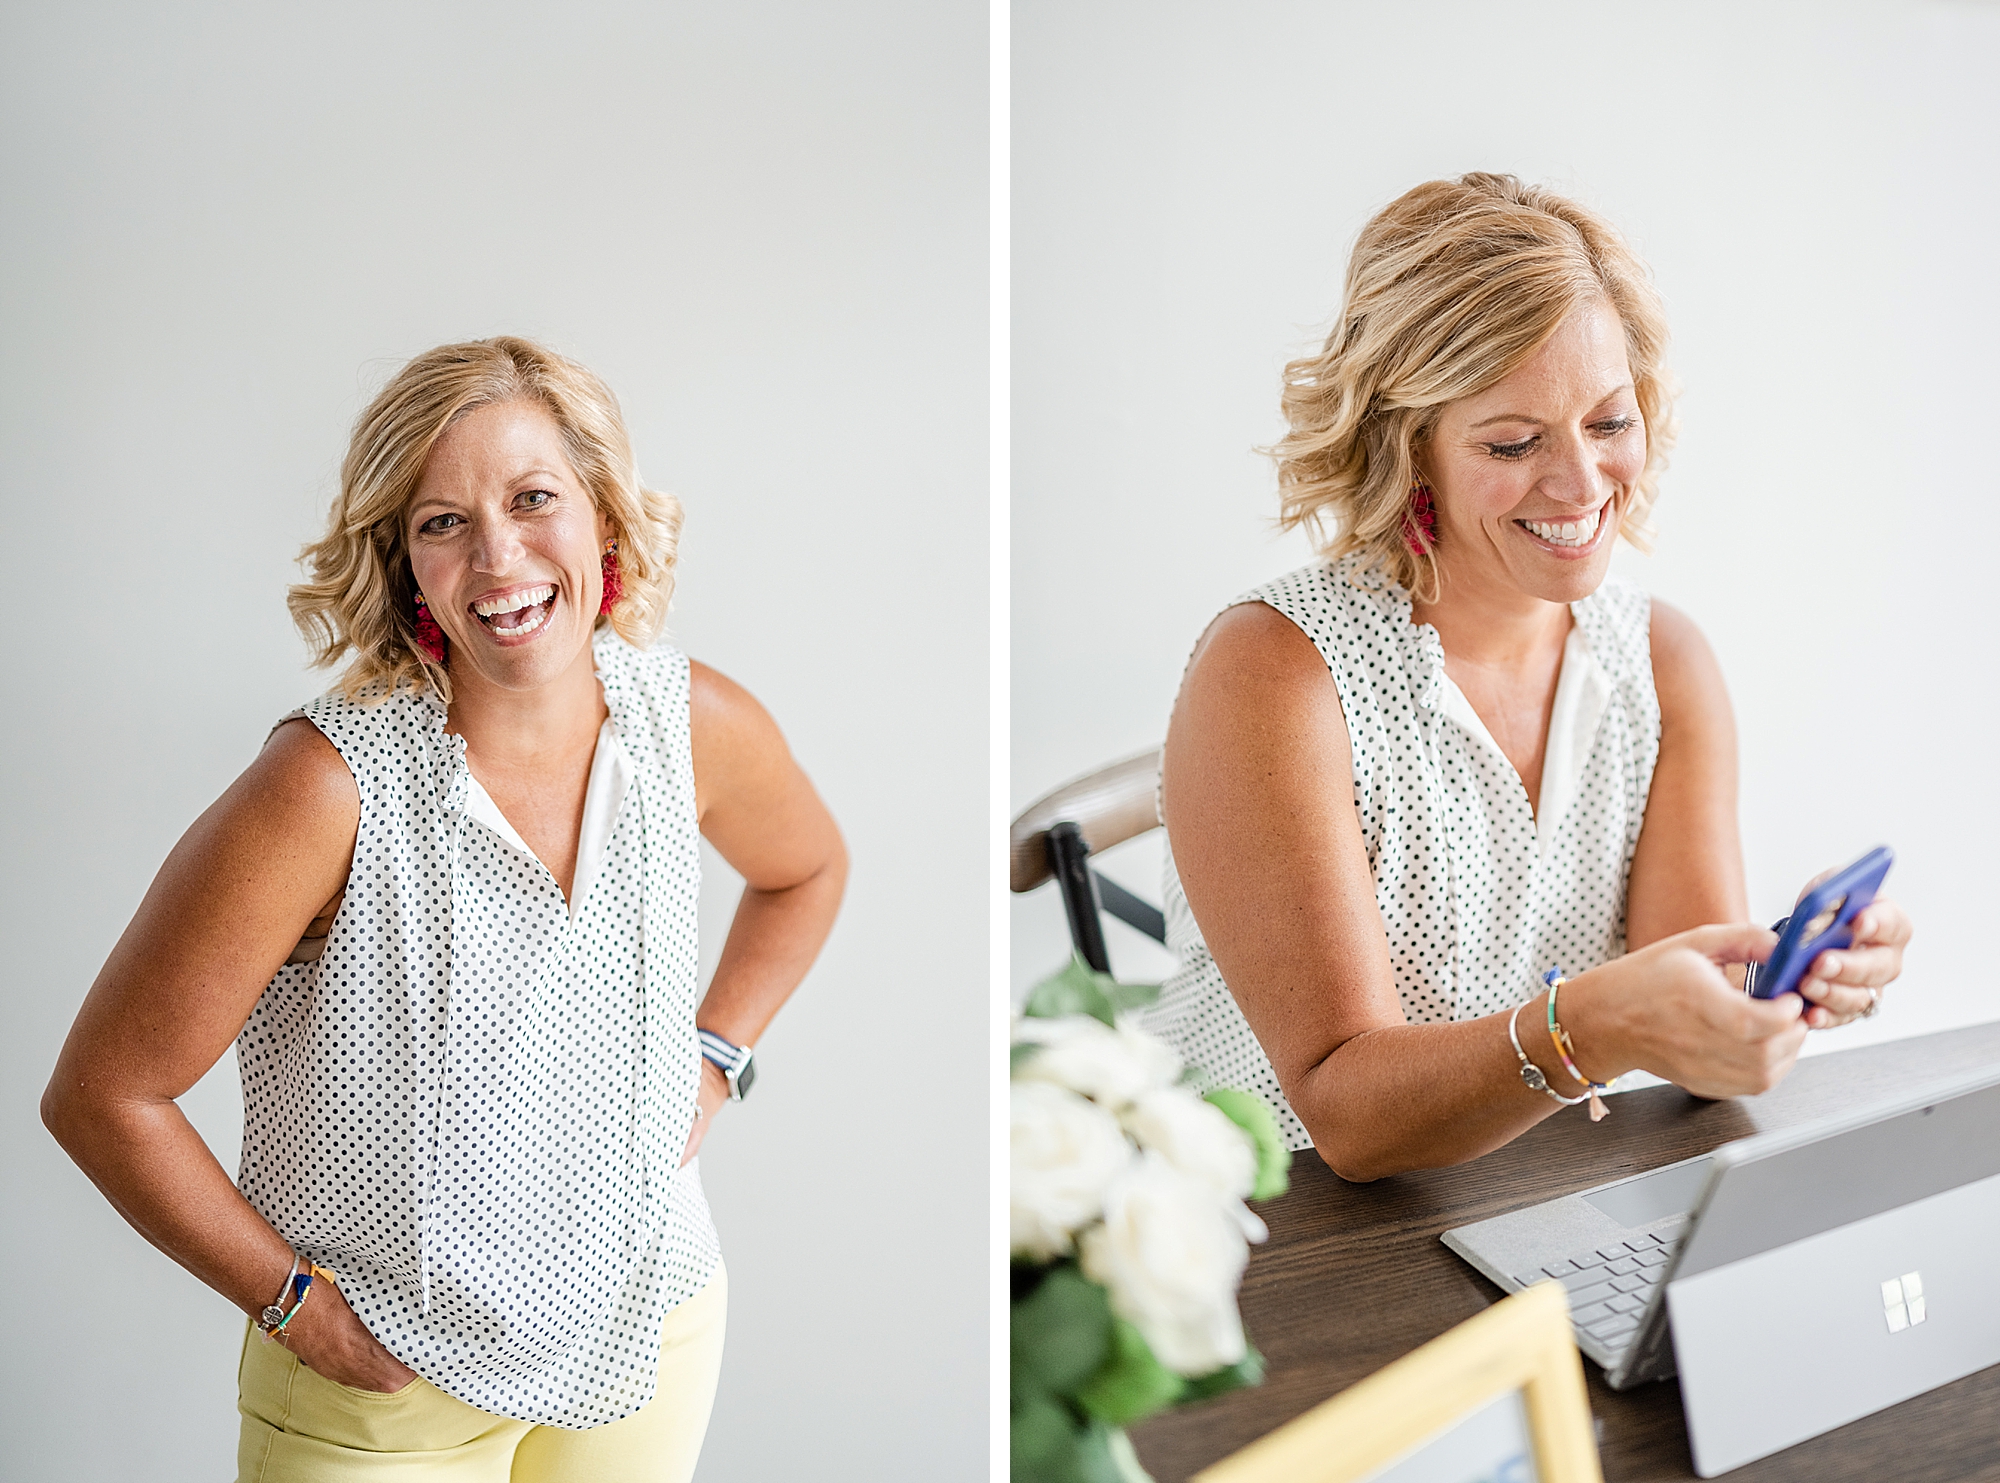 custom branding portraits for female business owners by Stephanie Kase Photography